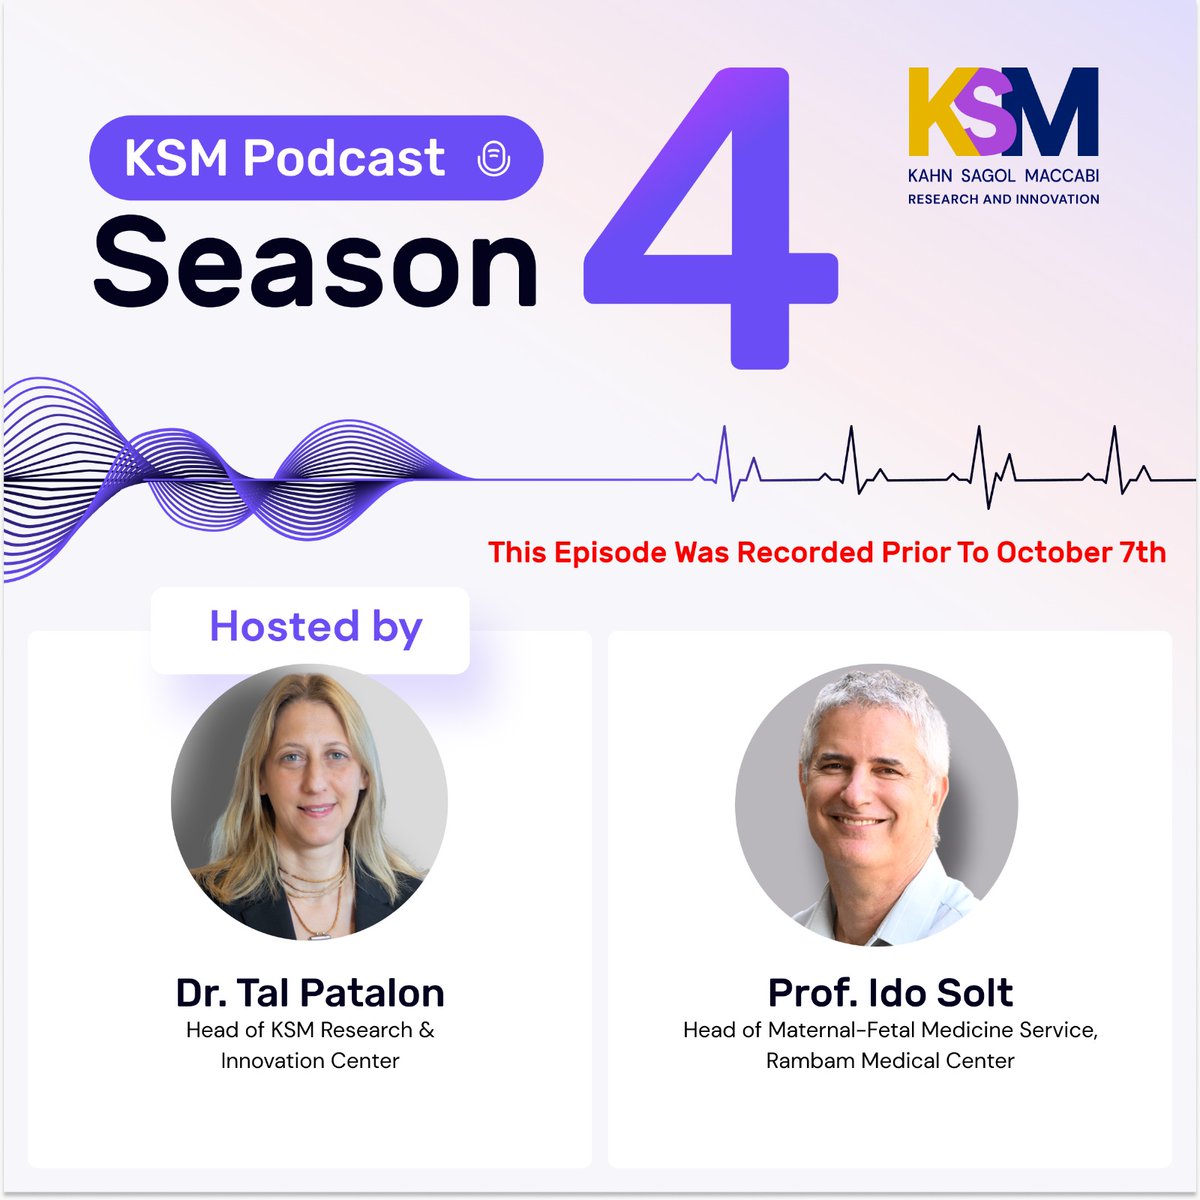 Dive into maternal-fetal medicine with Dr. Tal Patalon & Prof. Ido Solt, discussing treating two patients in one body and ethical pregnancy choices. To listen to this podcast episode: ksminnovation.com/podcast/prof_i… @TalPatalon @IdoSolt